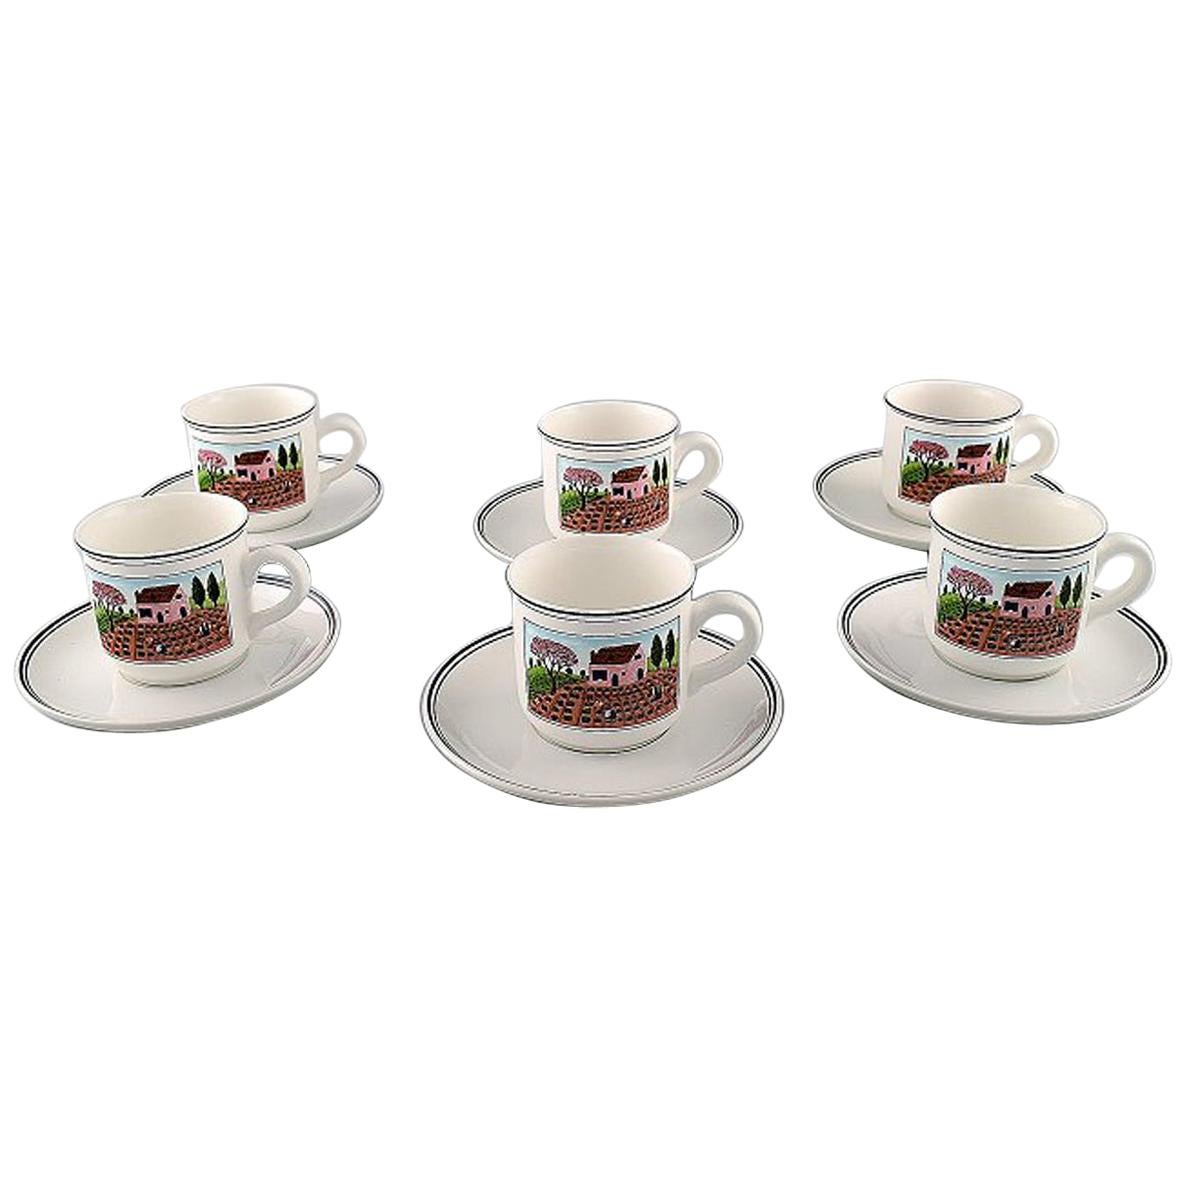 Villeroy & Boch Naif Coffee Service in Porcelain. a Set of 6 Large Cups&Saucers